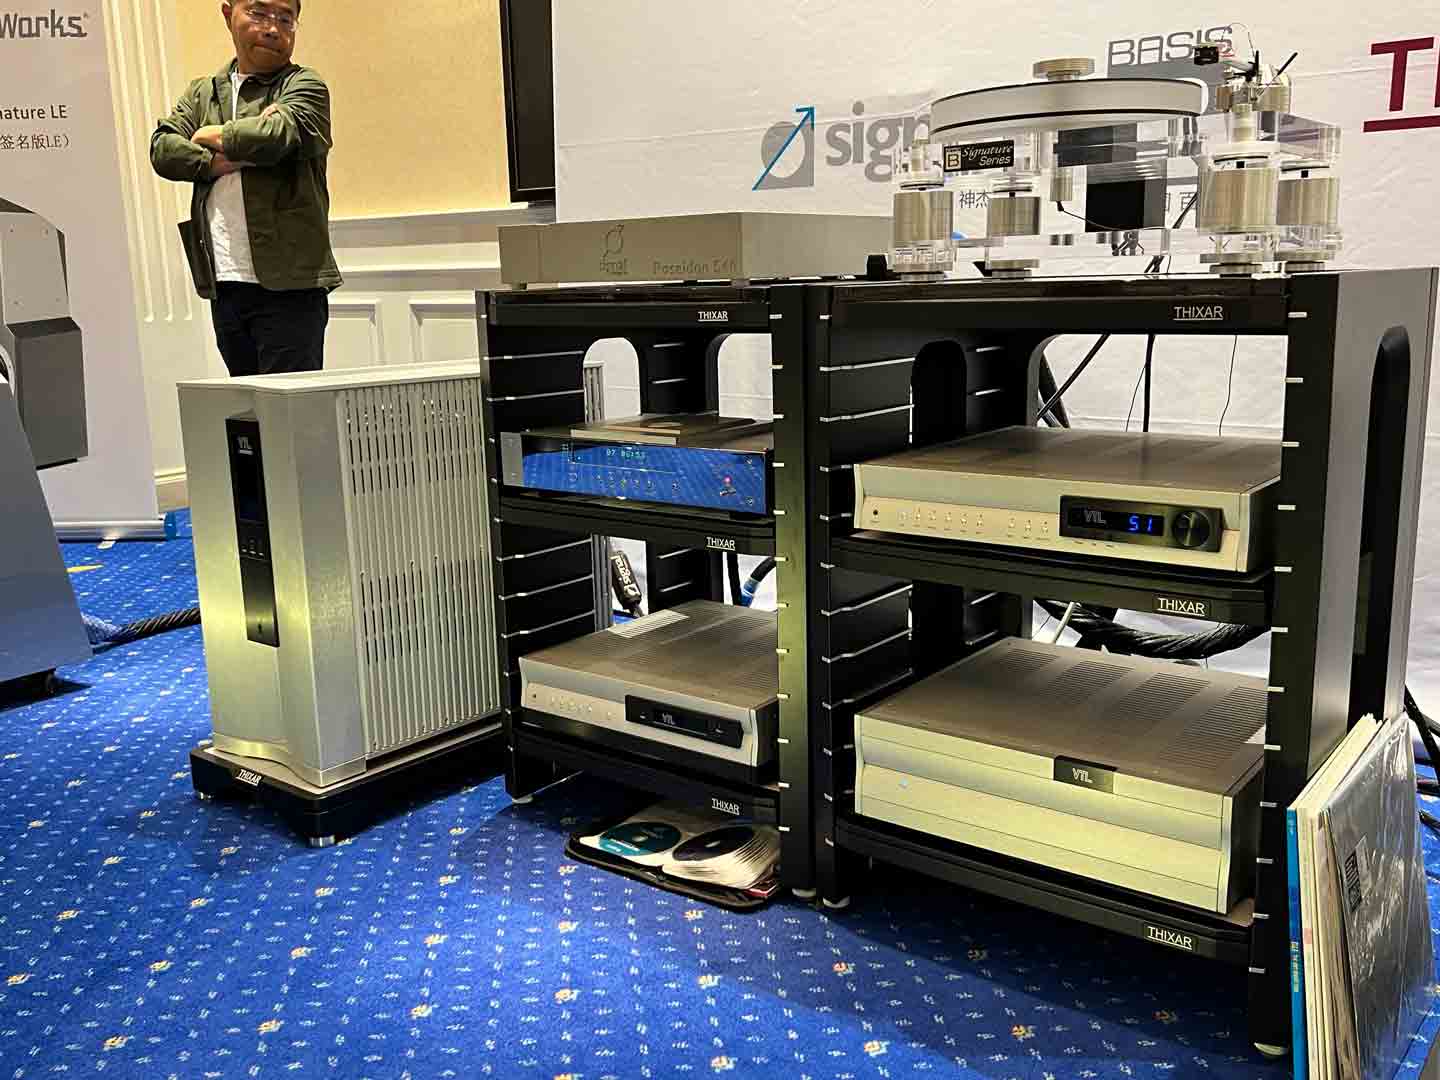 VTL TL7.5 Series III Reference Preamplifier - Shanghai High End Show 2023